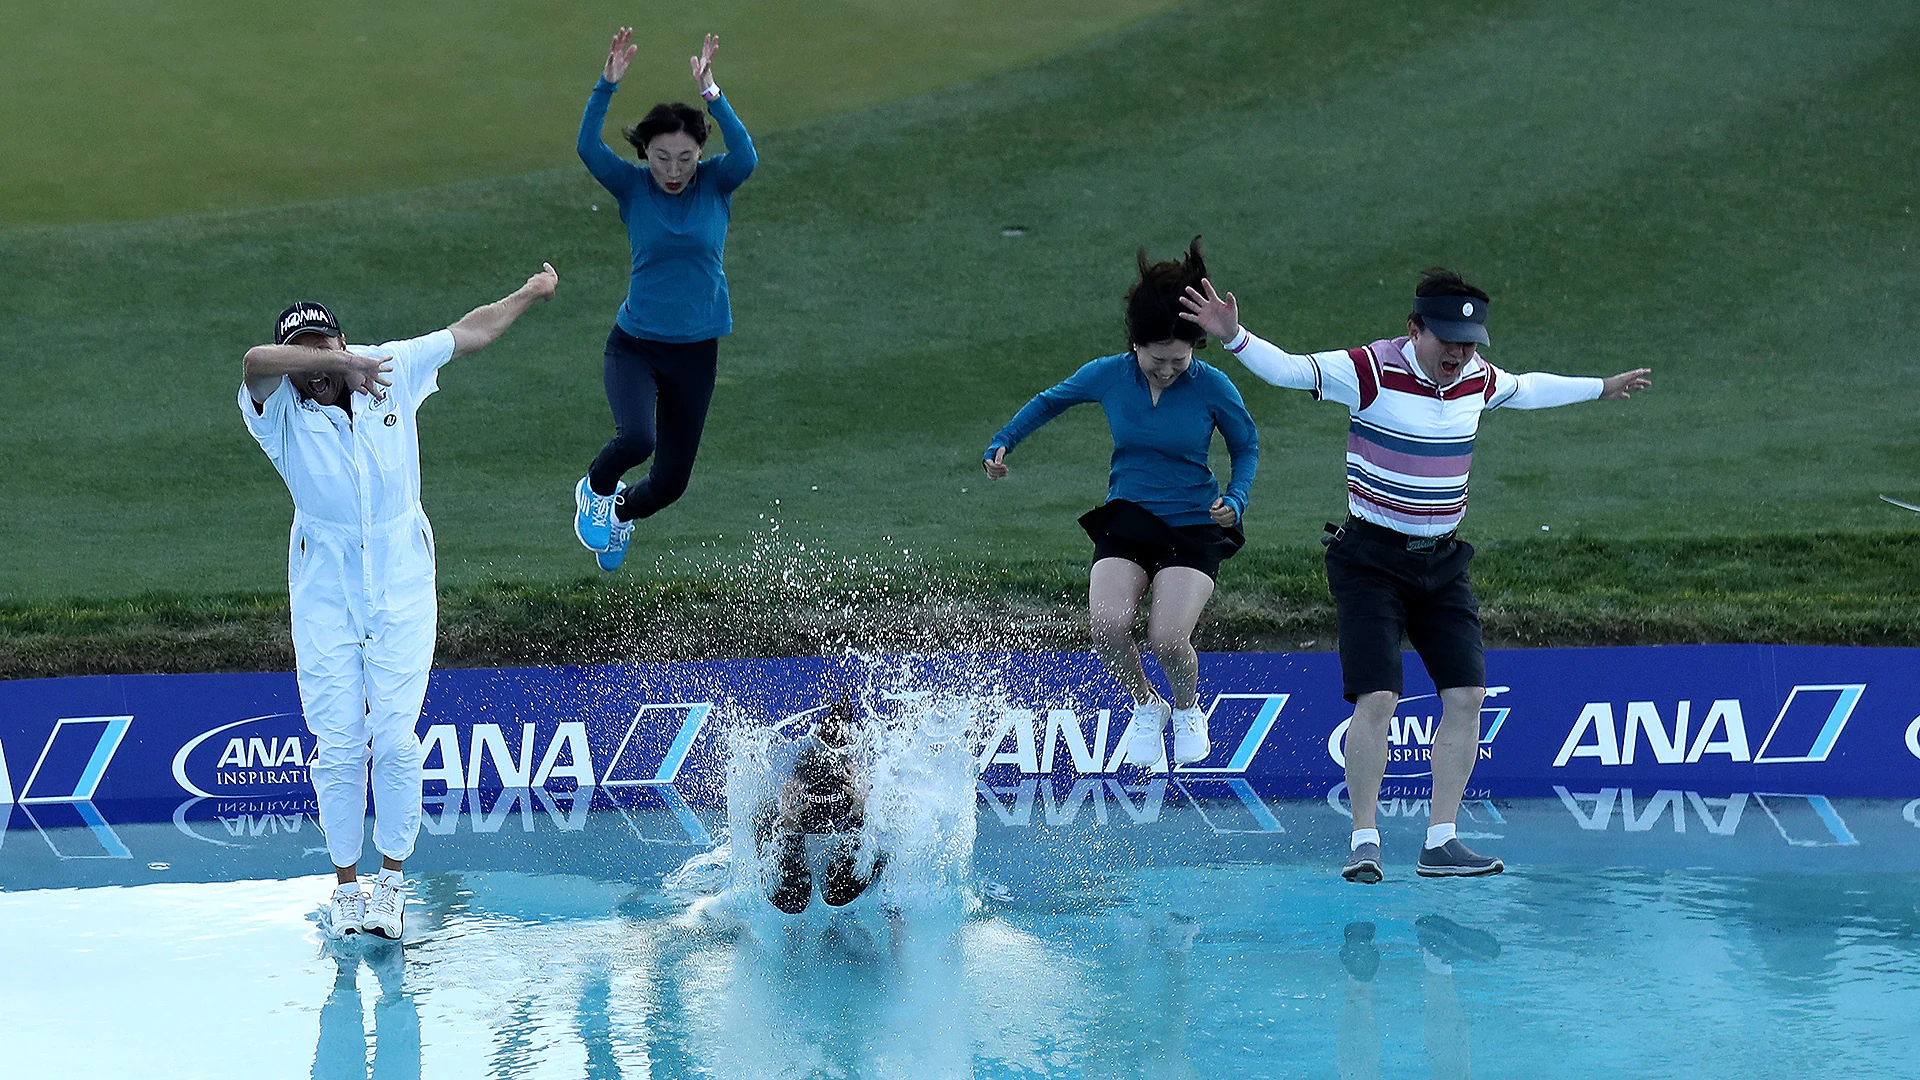 So long, Poppie’s Pond? Looking back at one of LPGA’s coolest traditions